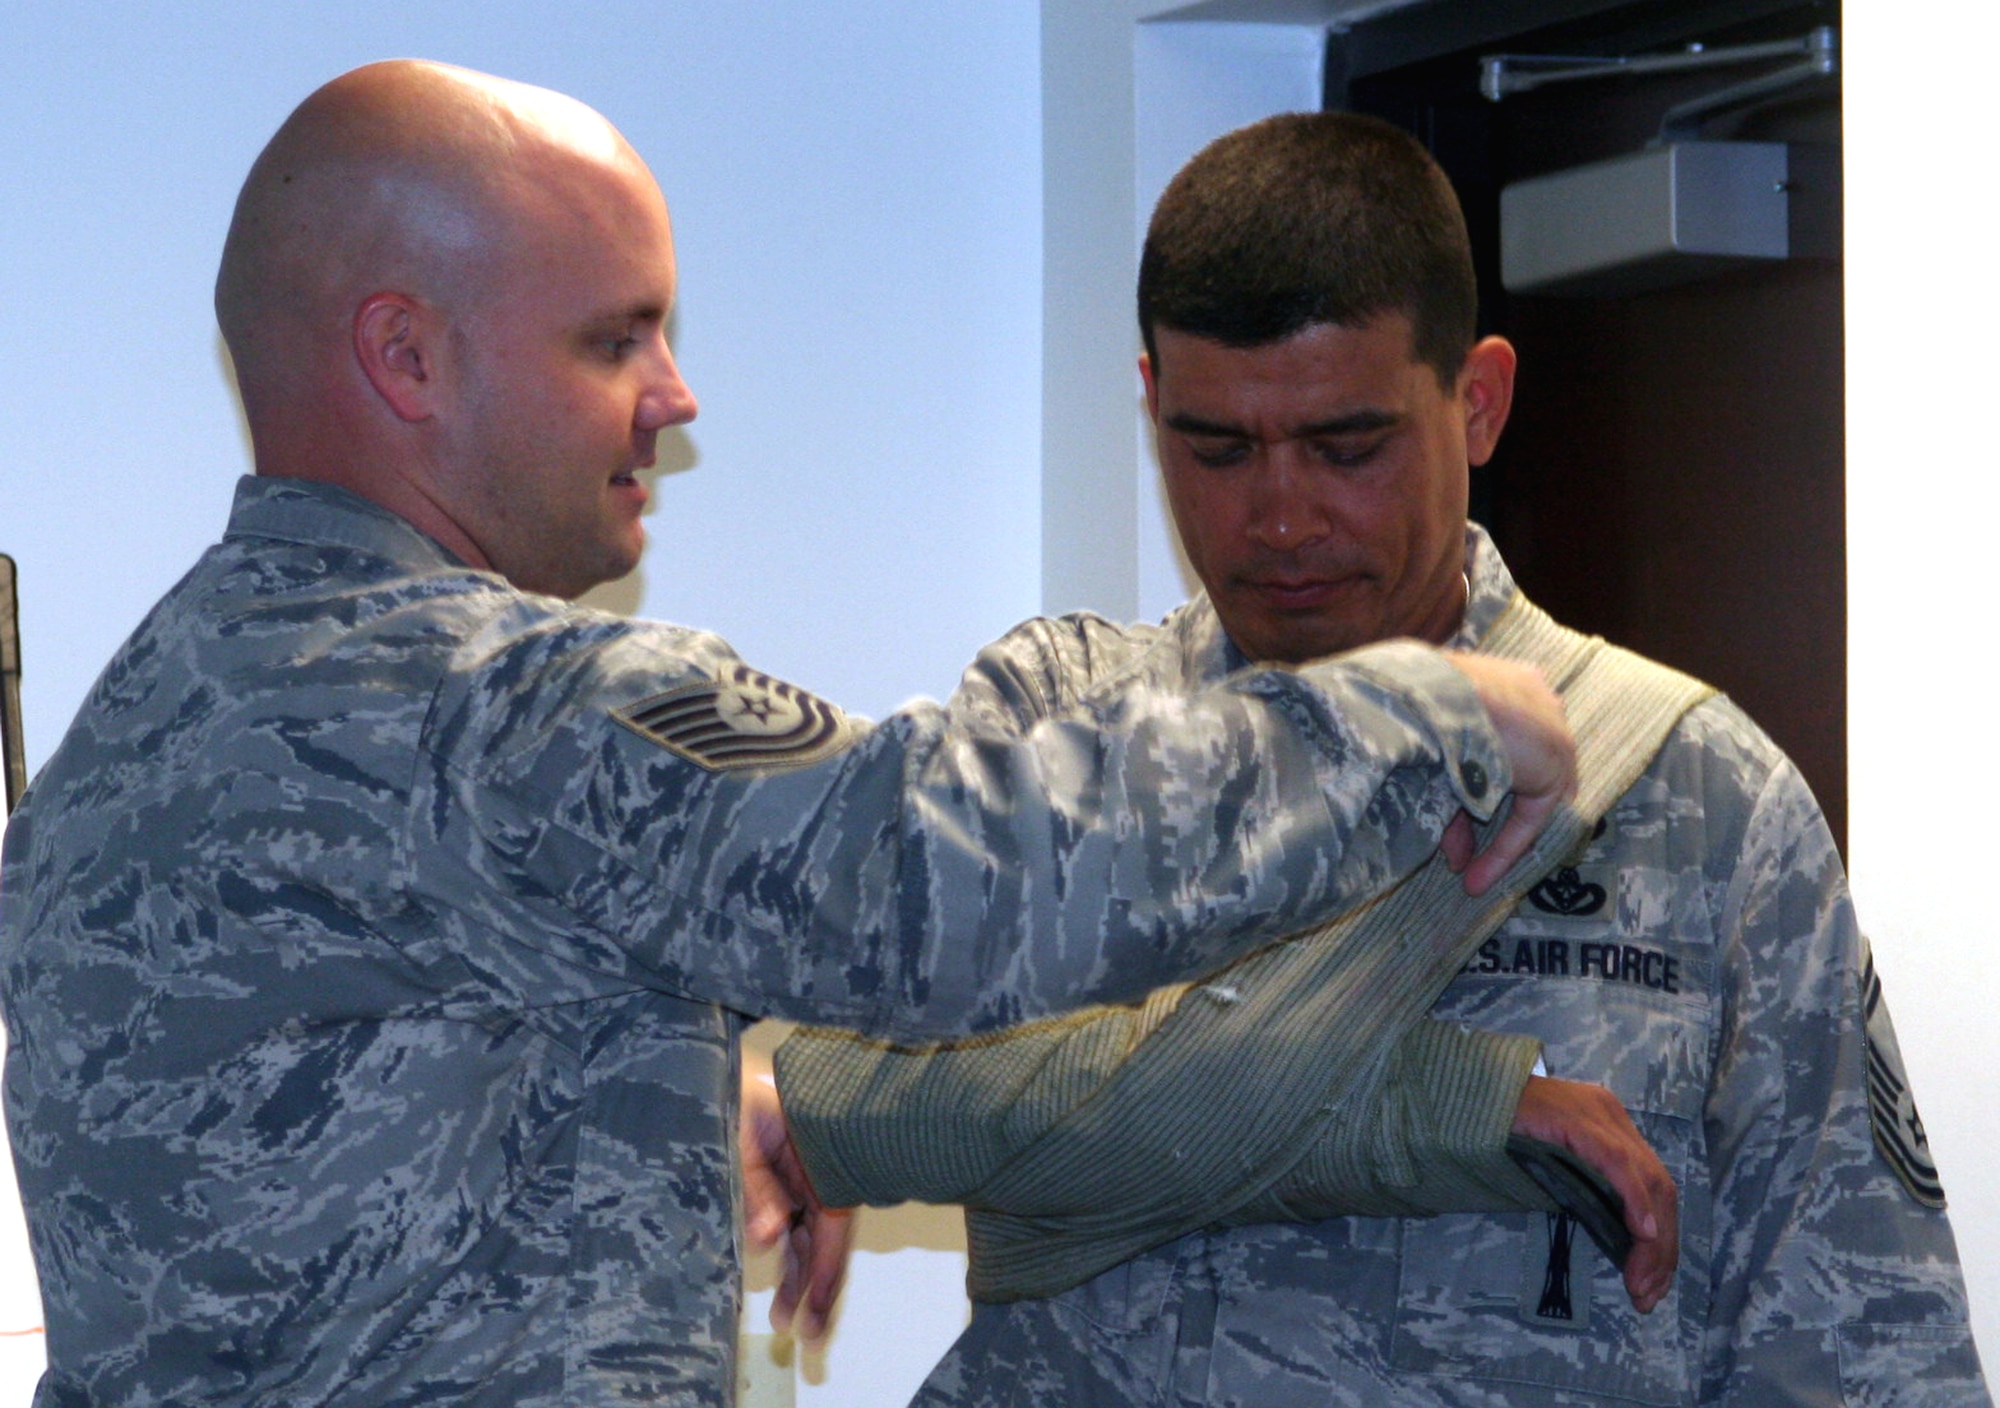 Tech. Sgt. Matt Thompson (left), independent duty medical technician and medical instructor for the U.S. Air Force Expeditionary Center's 421st Combat Training Squadron, teaches a session of the Care Under Fire (combat first aid) class to students in the Combat Airman Skills Training Course 10-1A on Nov. 9, 2009, at the center at Joint Base McGuire-Dix-Lakehurst, N.J.  The class focuses on combat lifesaver skills.  The CAST course trains Airmen for upcoming deployments.  (U.S. Air Force Photo/Tech. Sgt. Scott T. Sturkol)